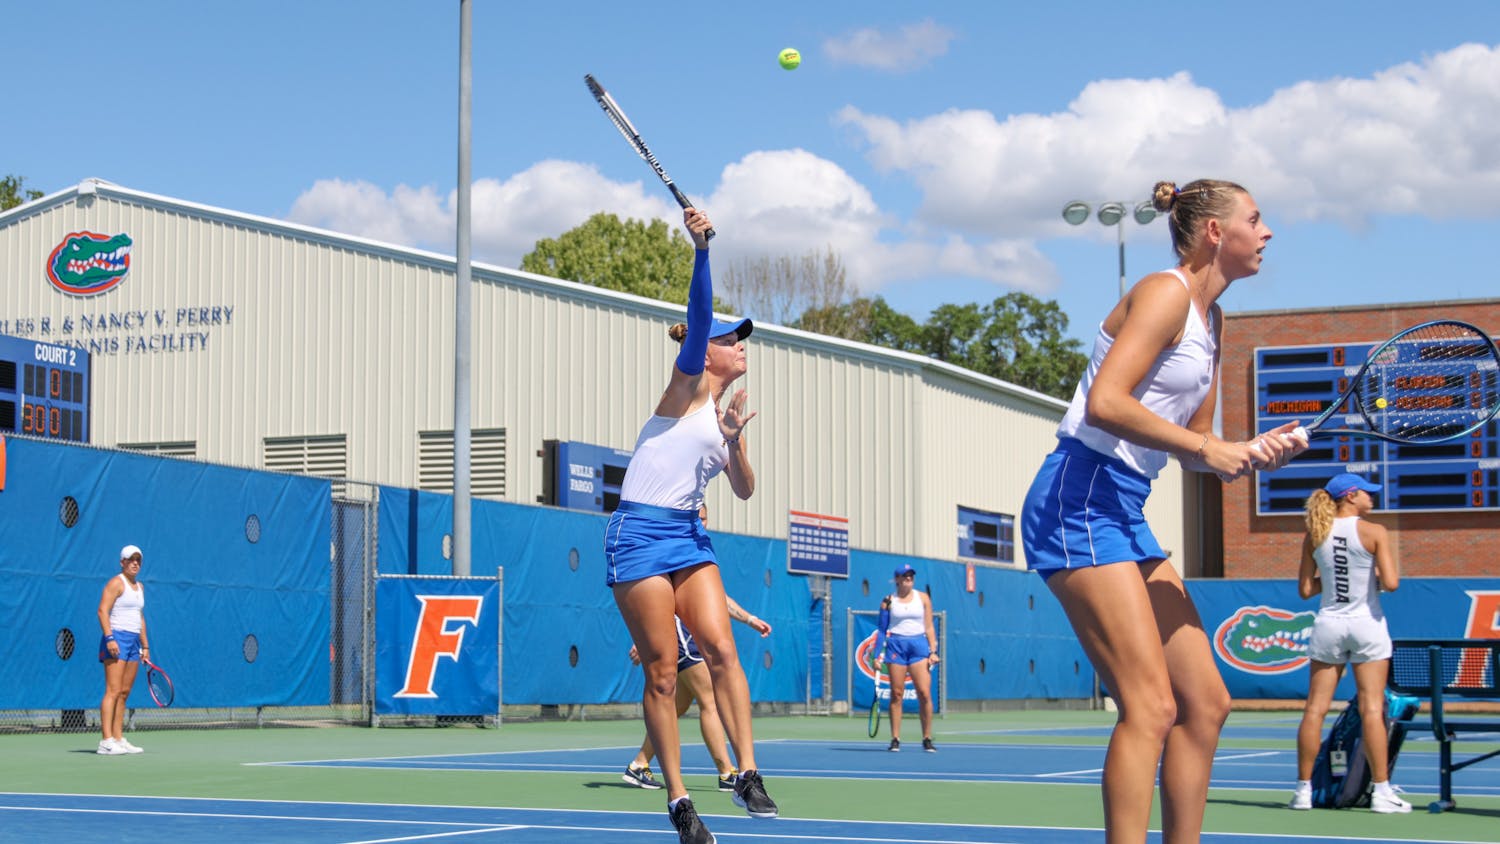 Florida sophomores Bente Spee (left) and Alicia Dudeney (right) compete in their doubles match during the Gators' 4-1 win over the Michigan Wolverines Wednesday, March 22, 2023.